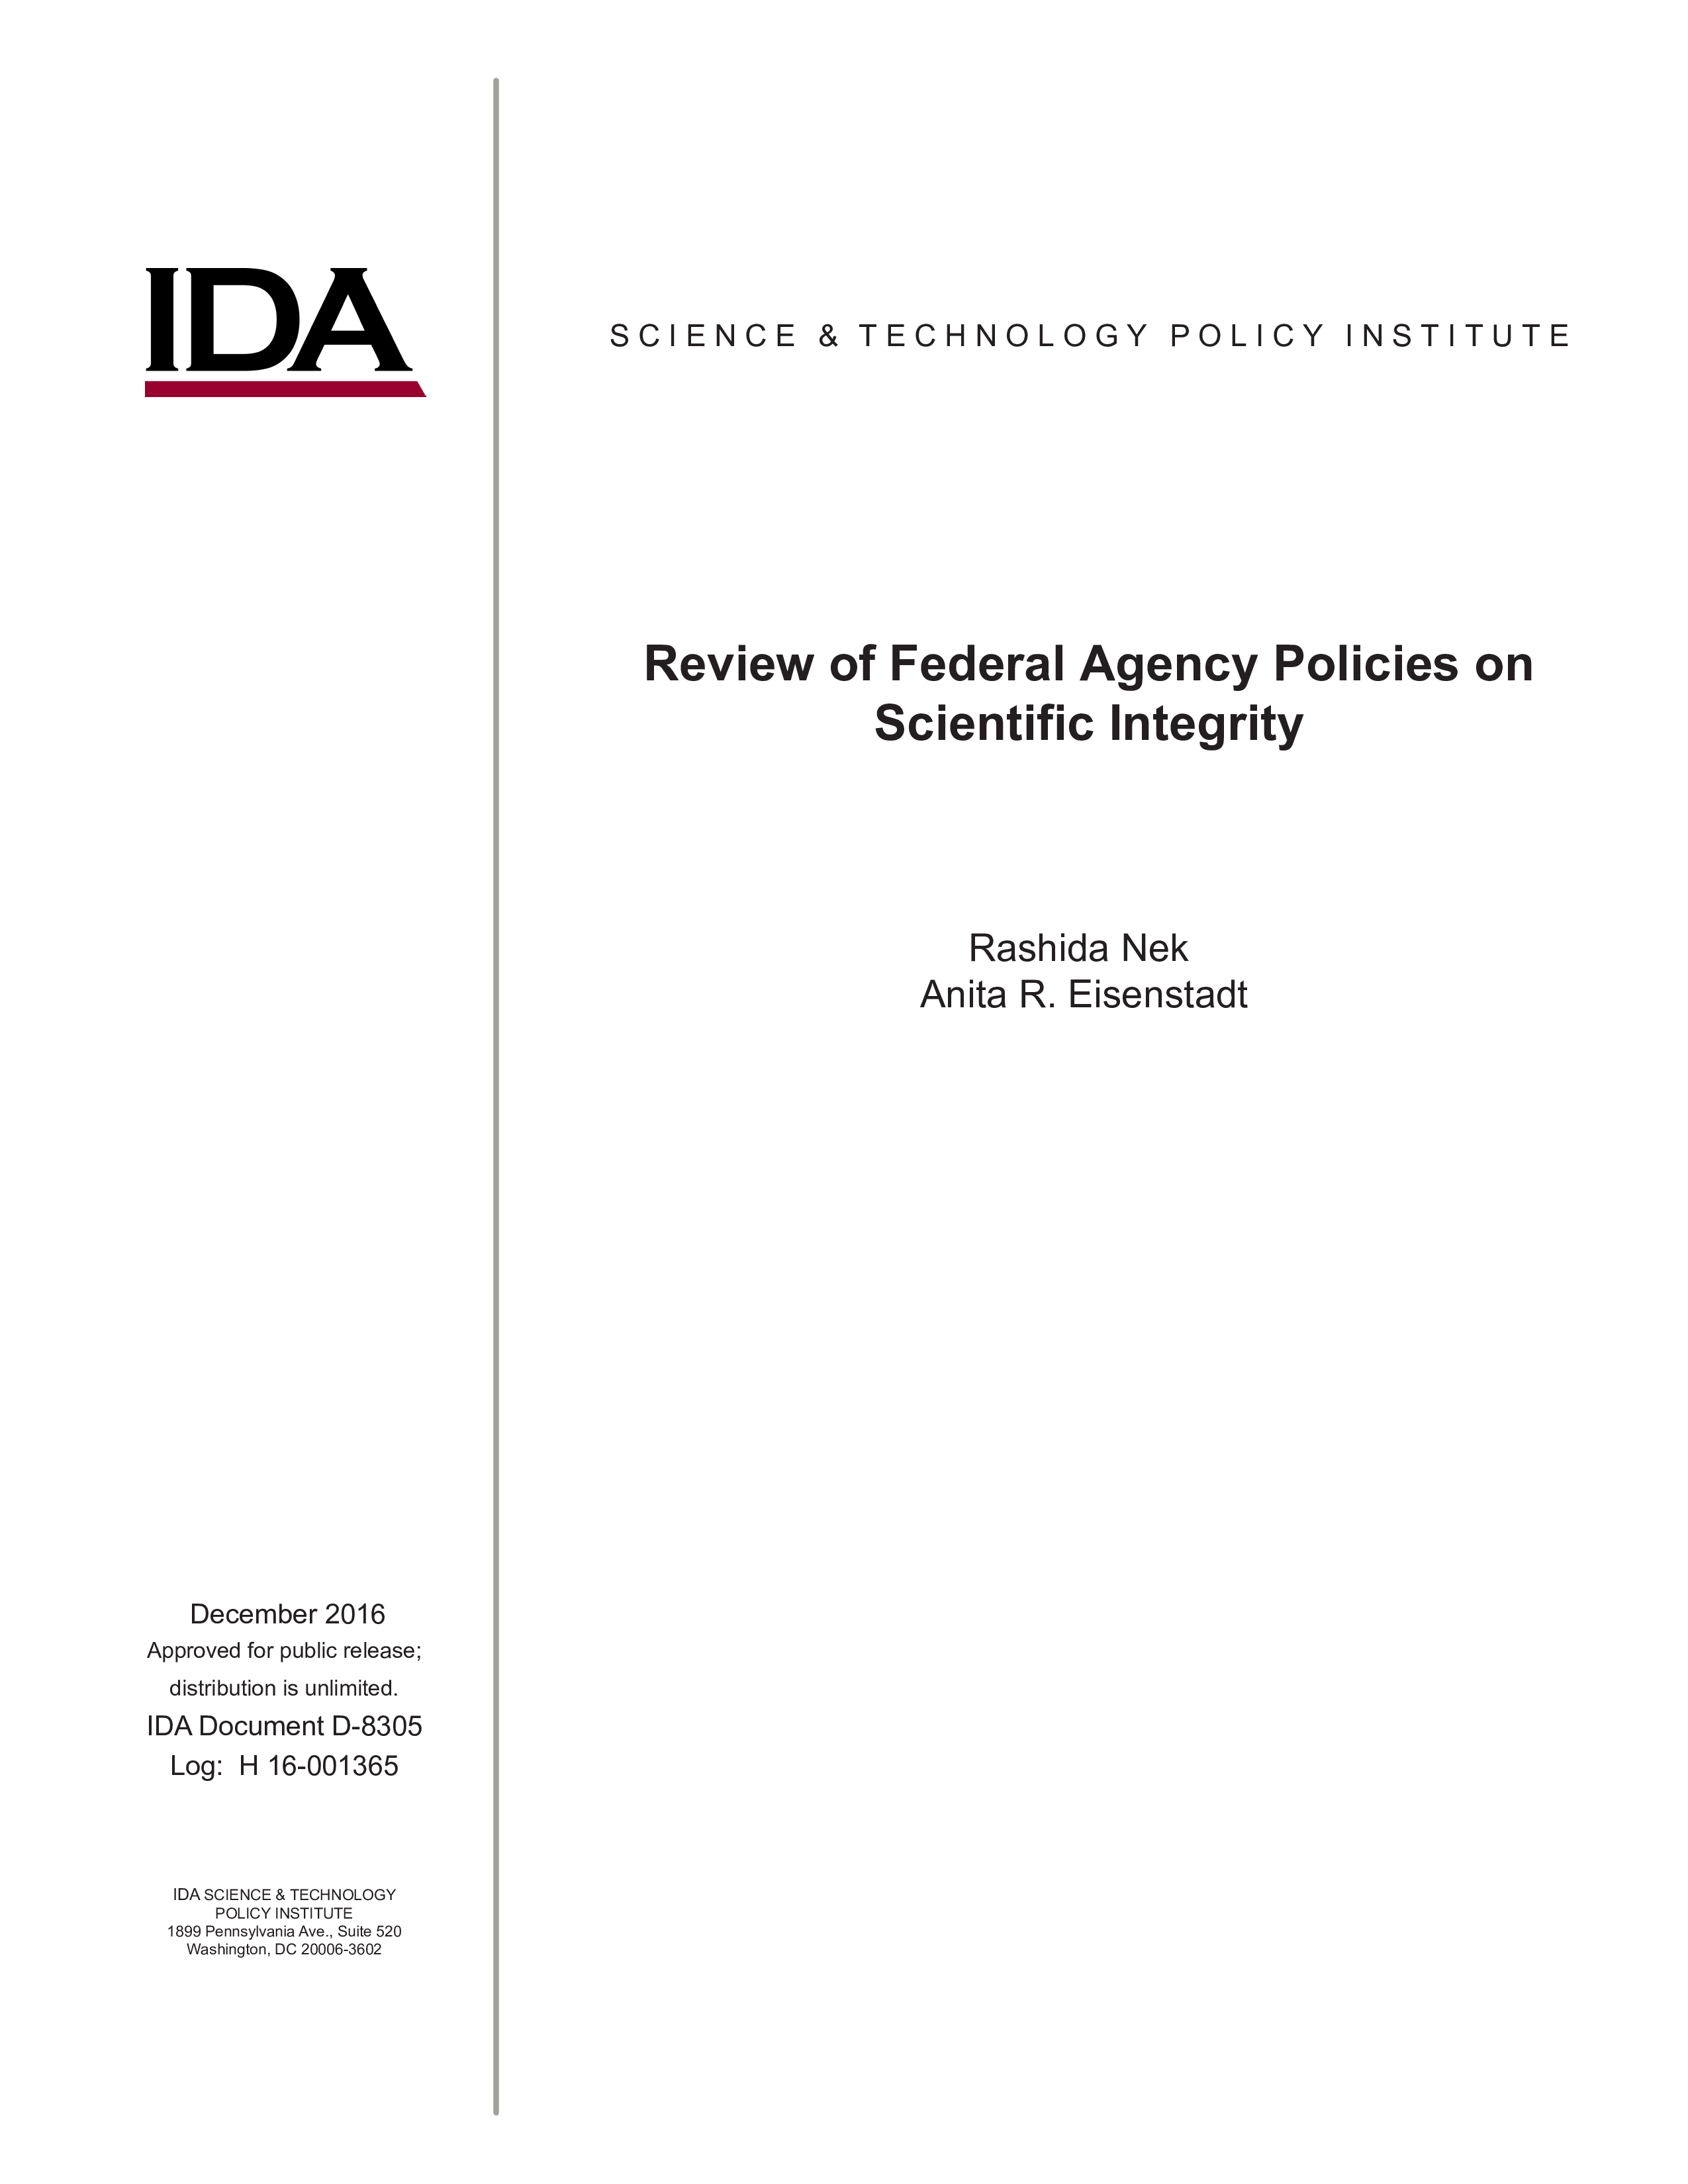 Review of Federal Agency Policies on Scientific Integrity